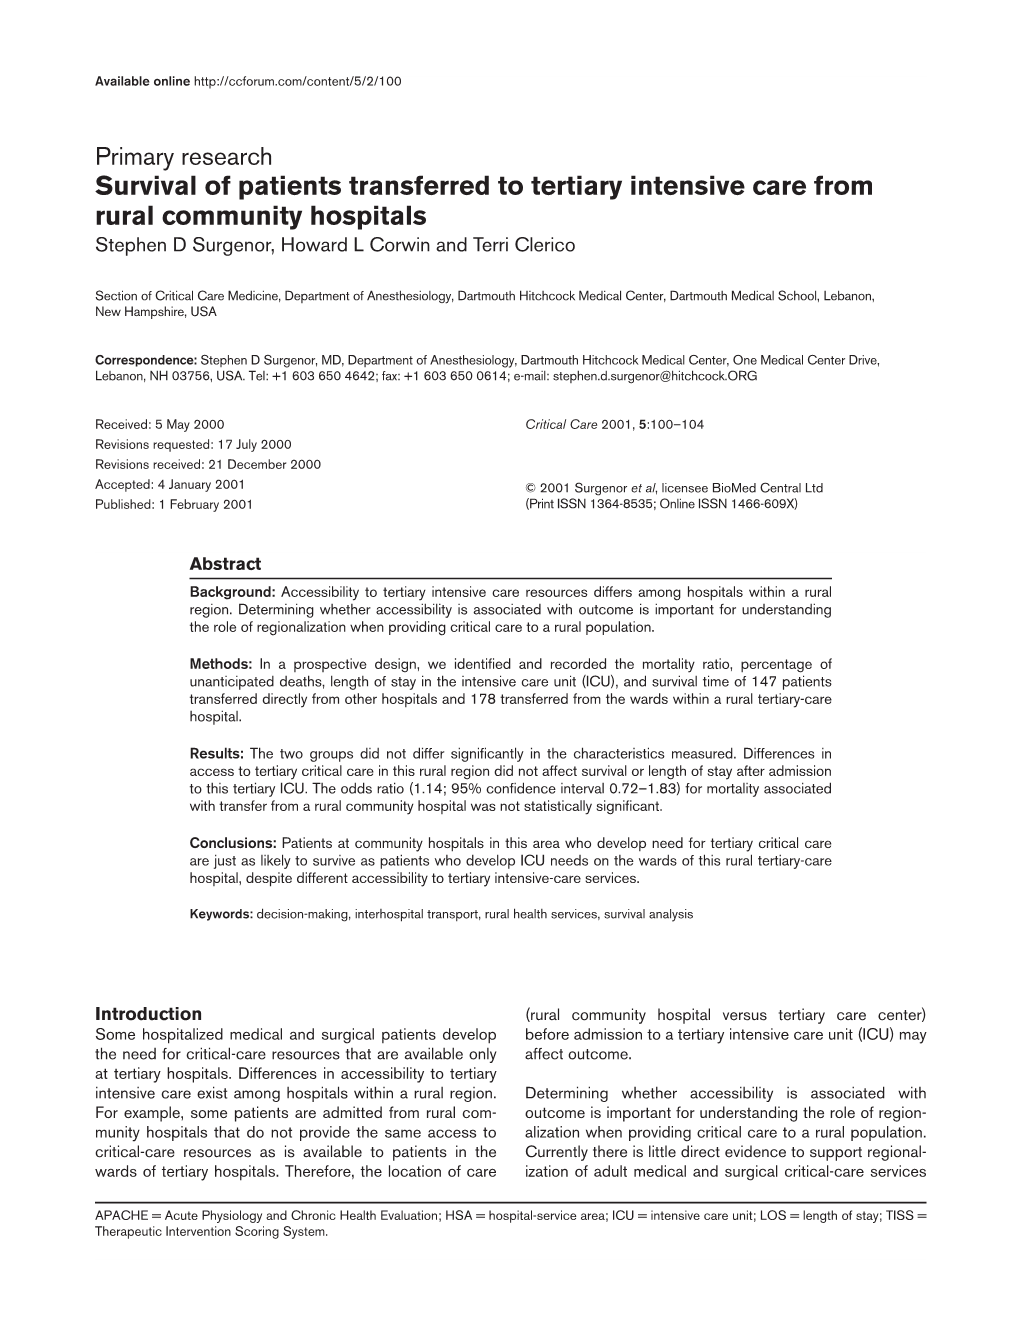 Survival of Patients Transferred to Tertiary Intensive Care from Rural Community Hospitals Stephen D Surgenor, Howard L Corwin and Terri Clerico